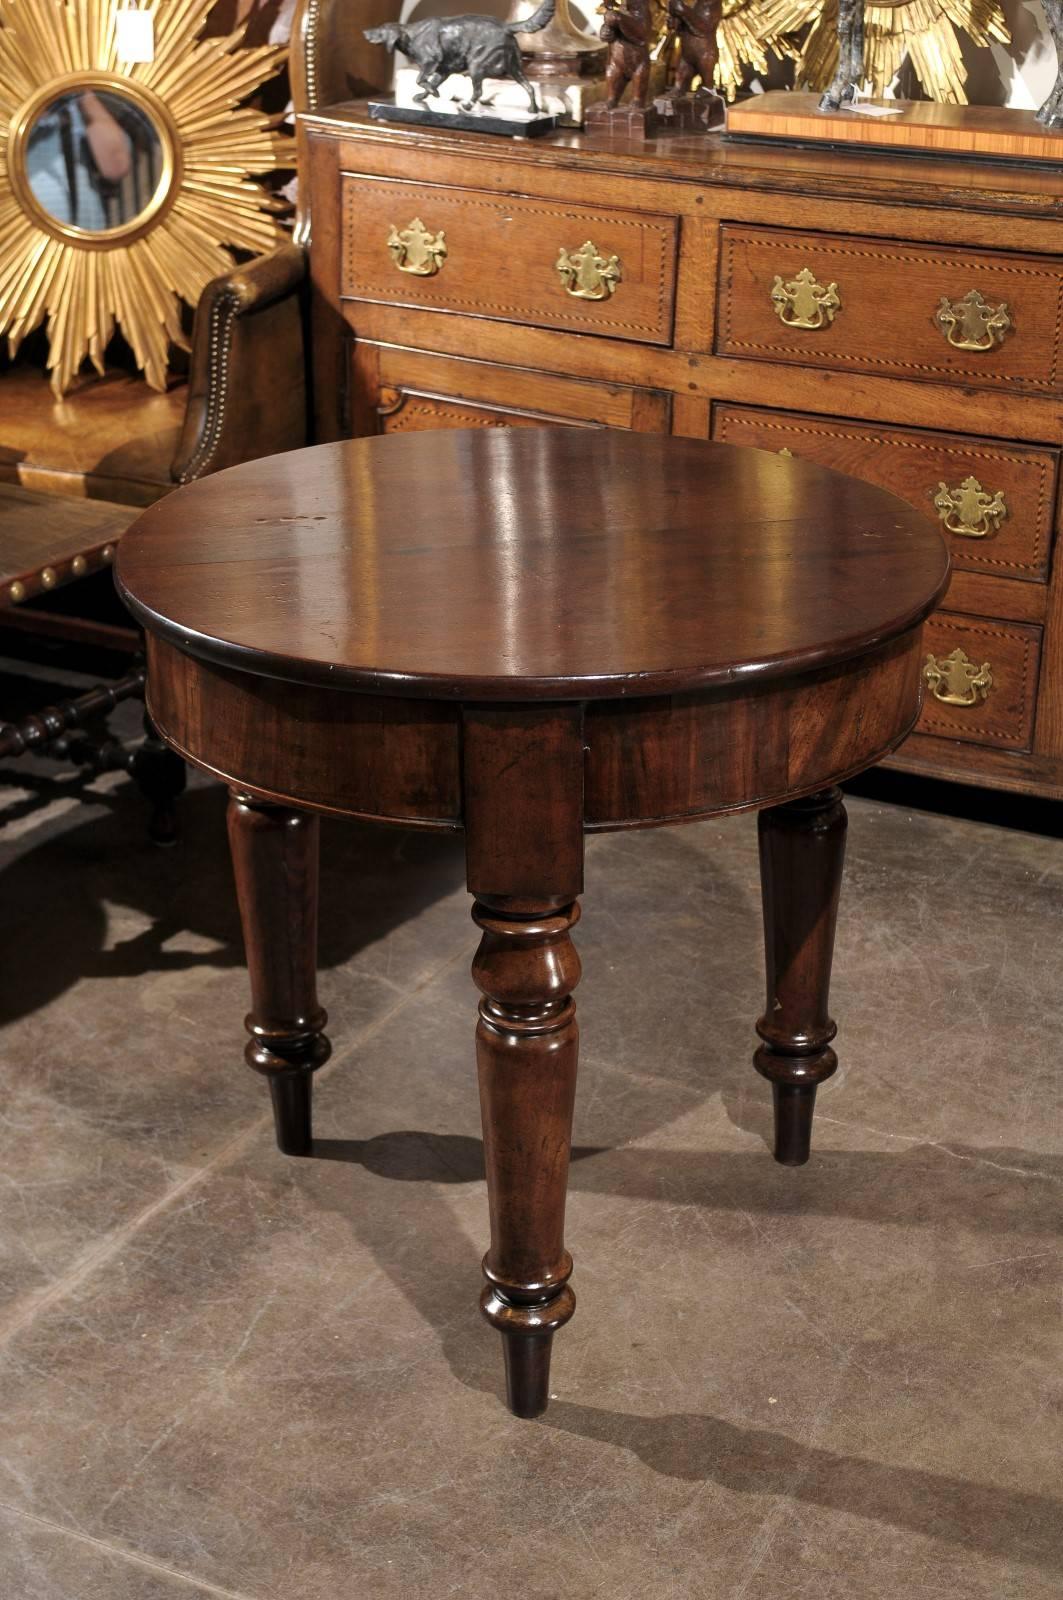 An English mid 19th century mahogany center table with a round planked top raised on three elegant baluster-turned legs ending in toupie feet. The plain round apron is only interrupted by the upper cubic parts of the three legs. The beautiful dark